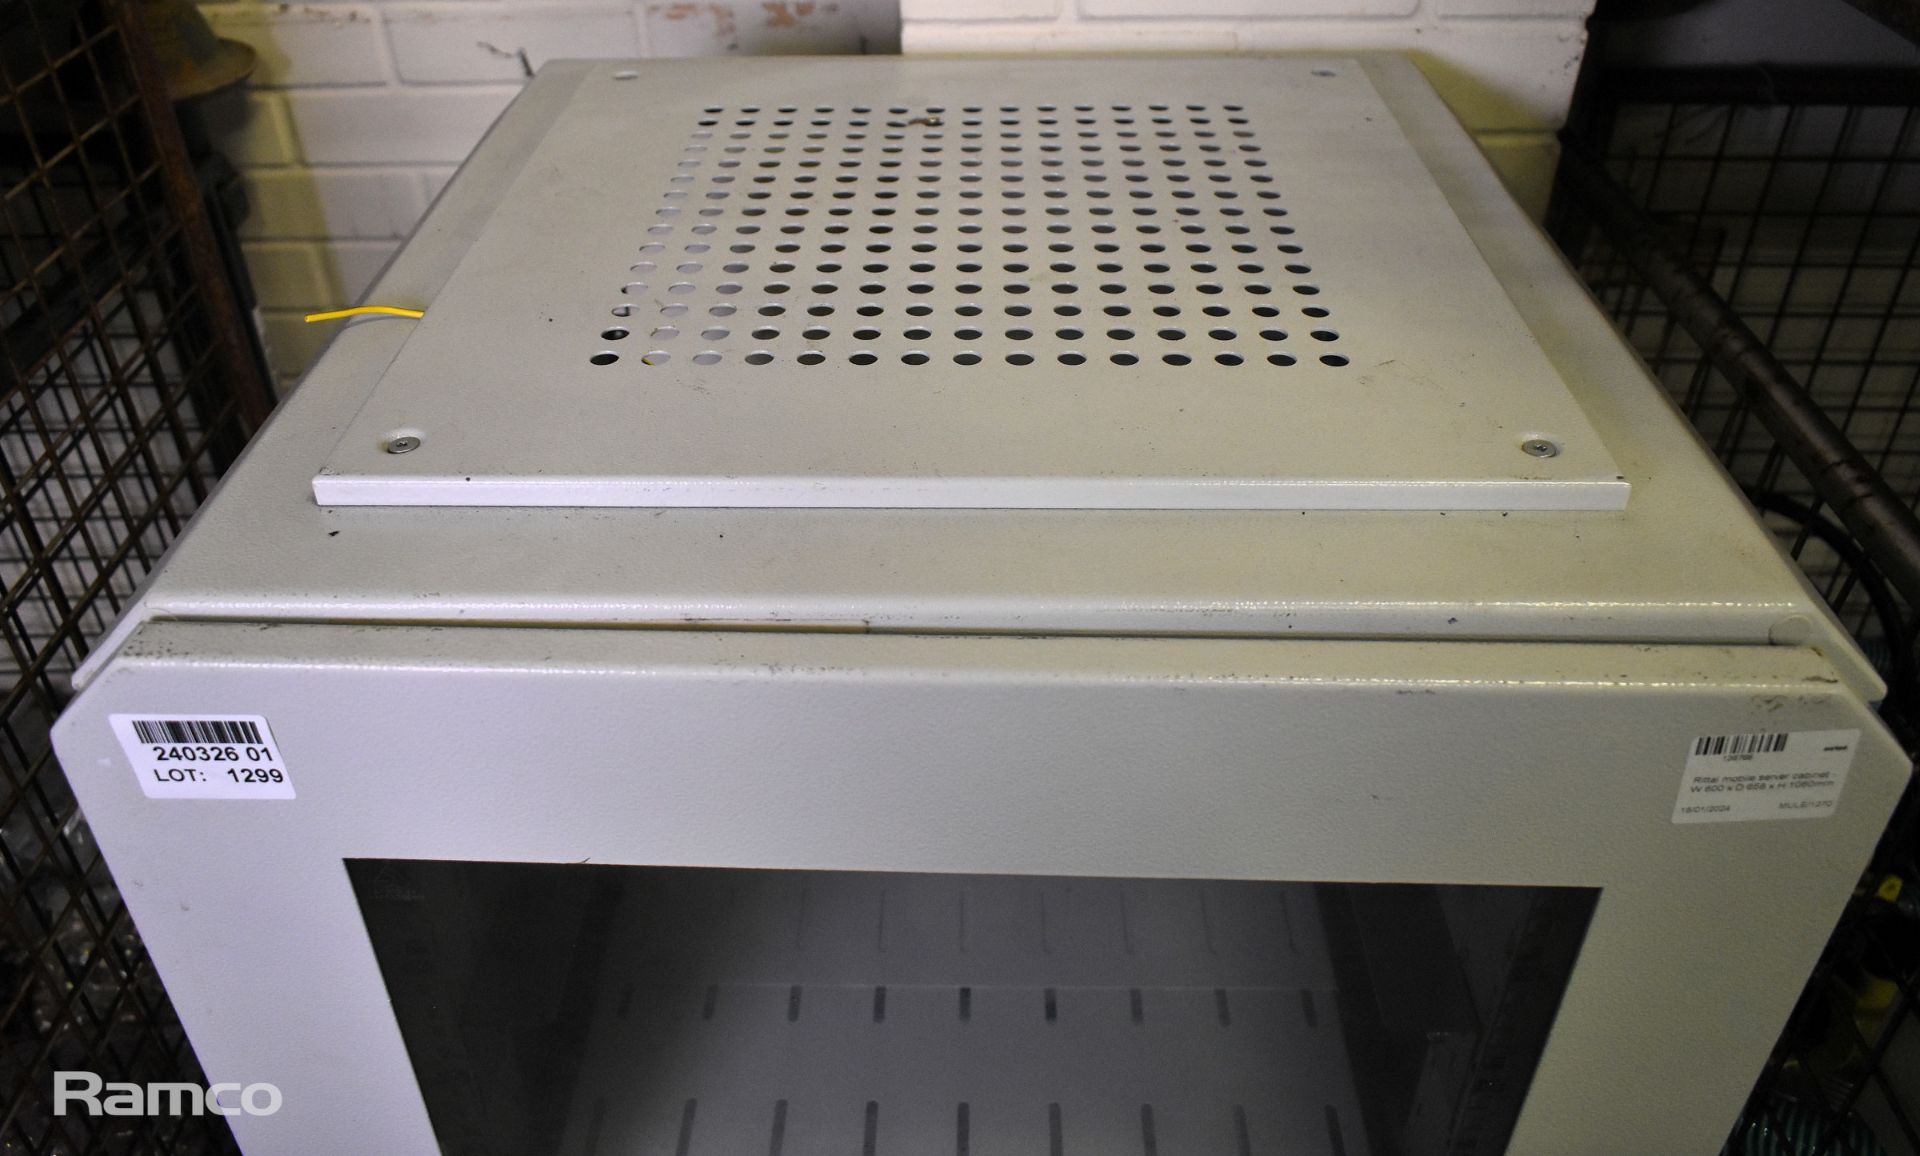 Rittal mobile server cabinet - W 600 x D 658 x H 1060mm - Image 2 of 6